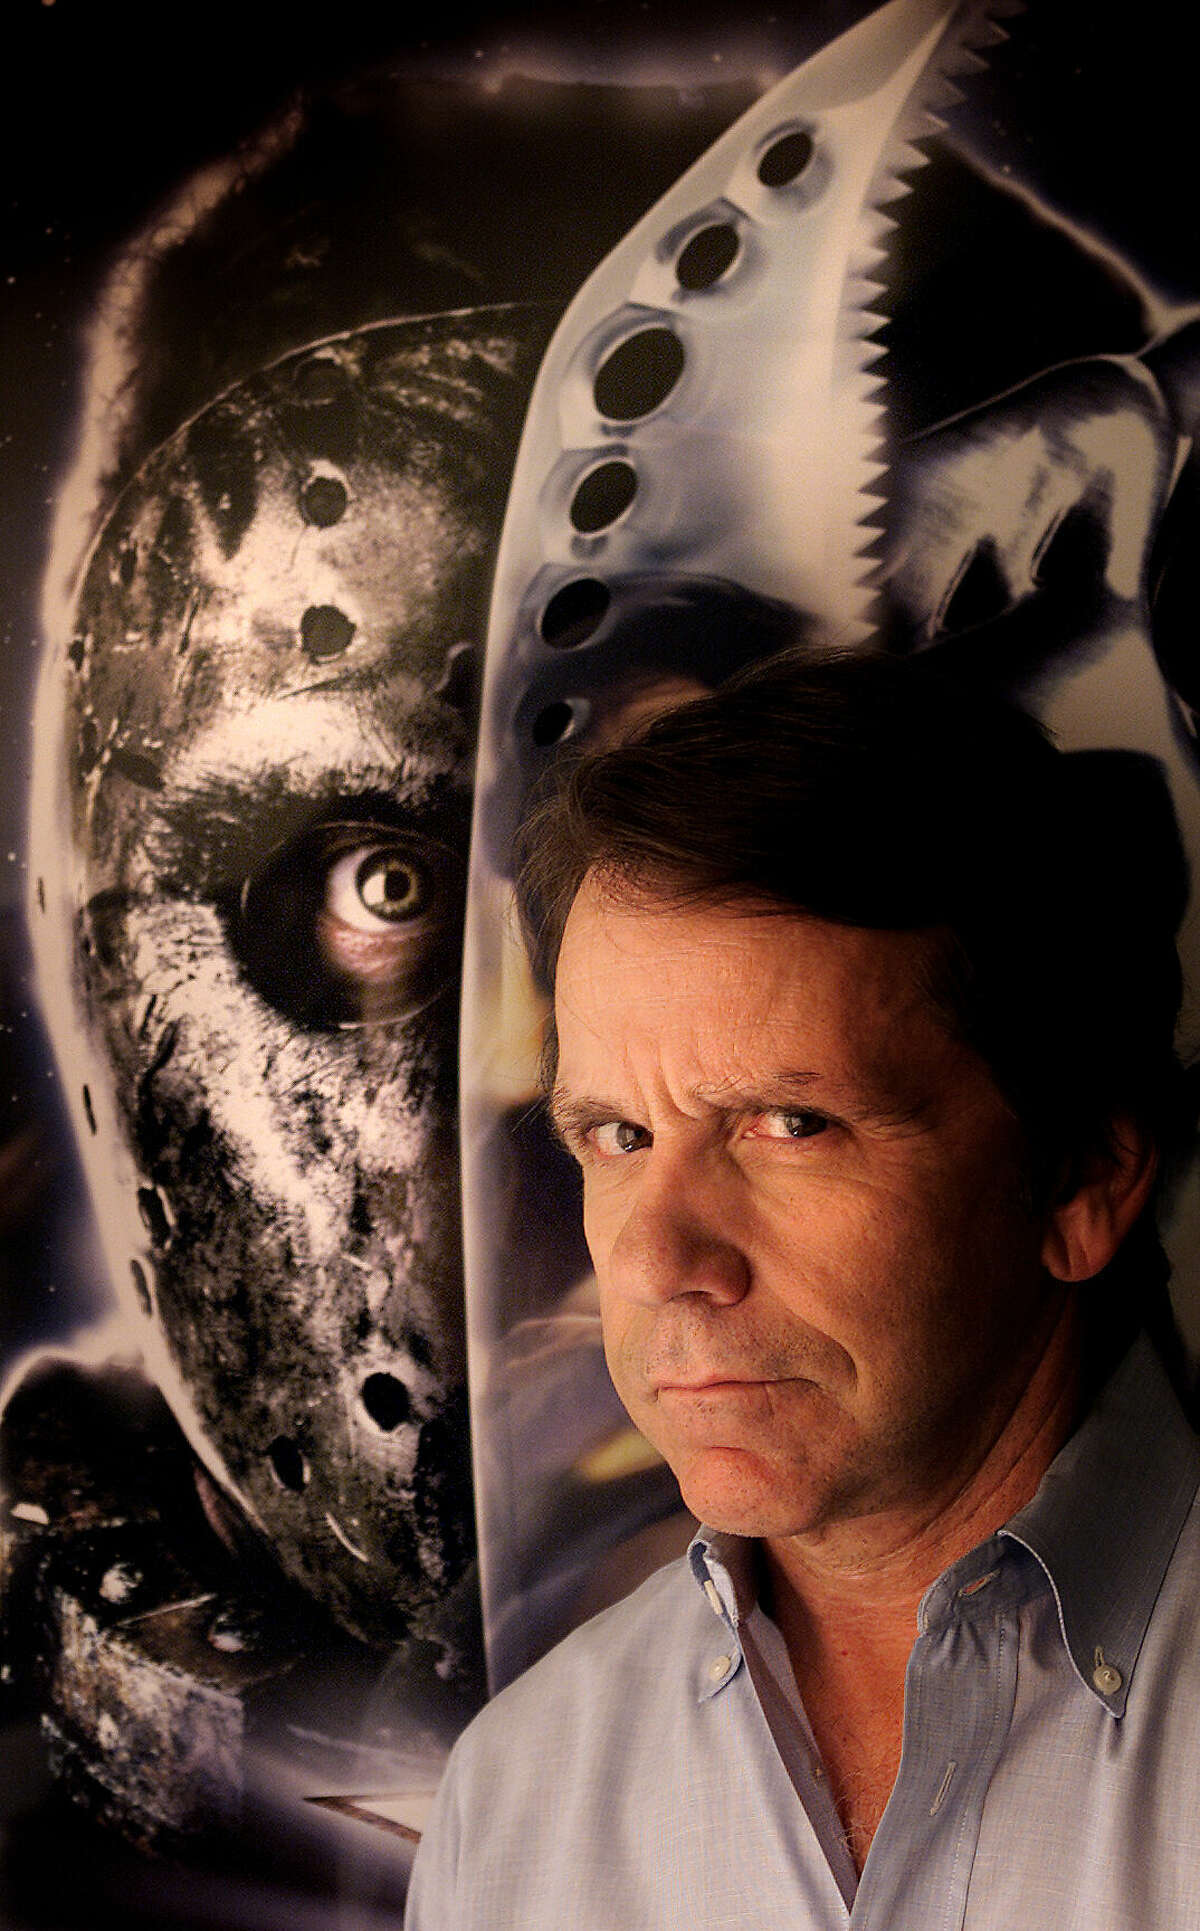 Sean S. Cunningham in 2002, promoting the Friday the 13th sequel Jason X.